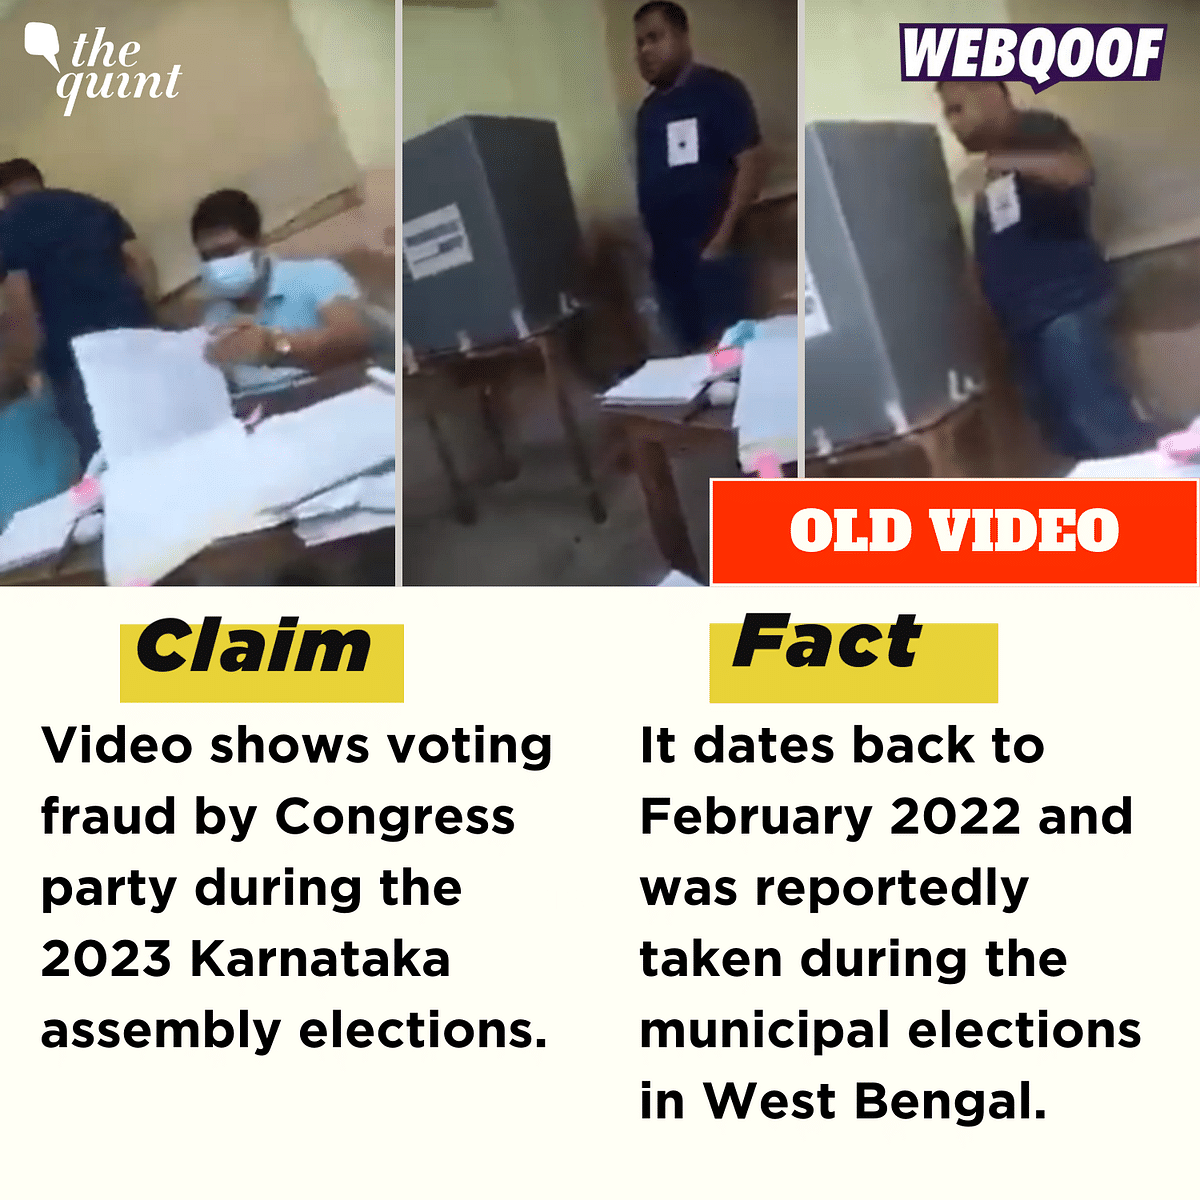 Social media has been abuzz with several fake claims around the Karnataka Assembly elections.